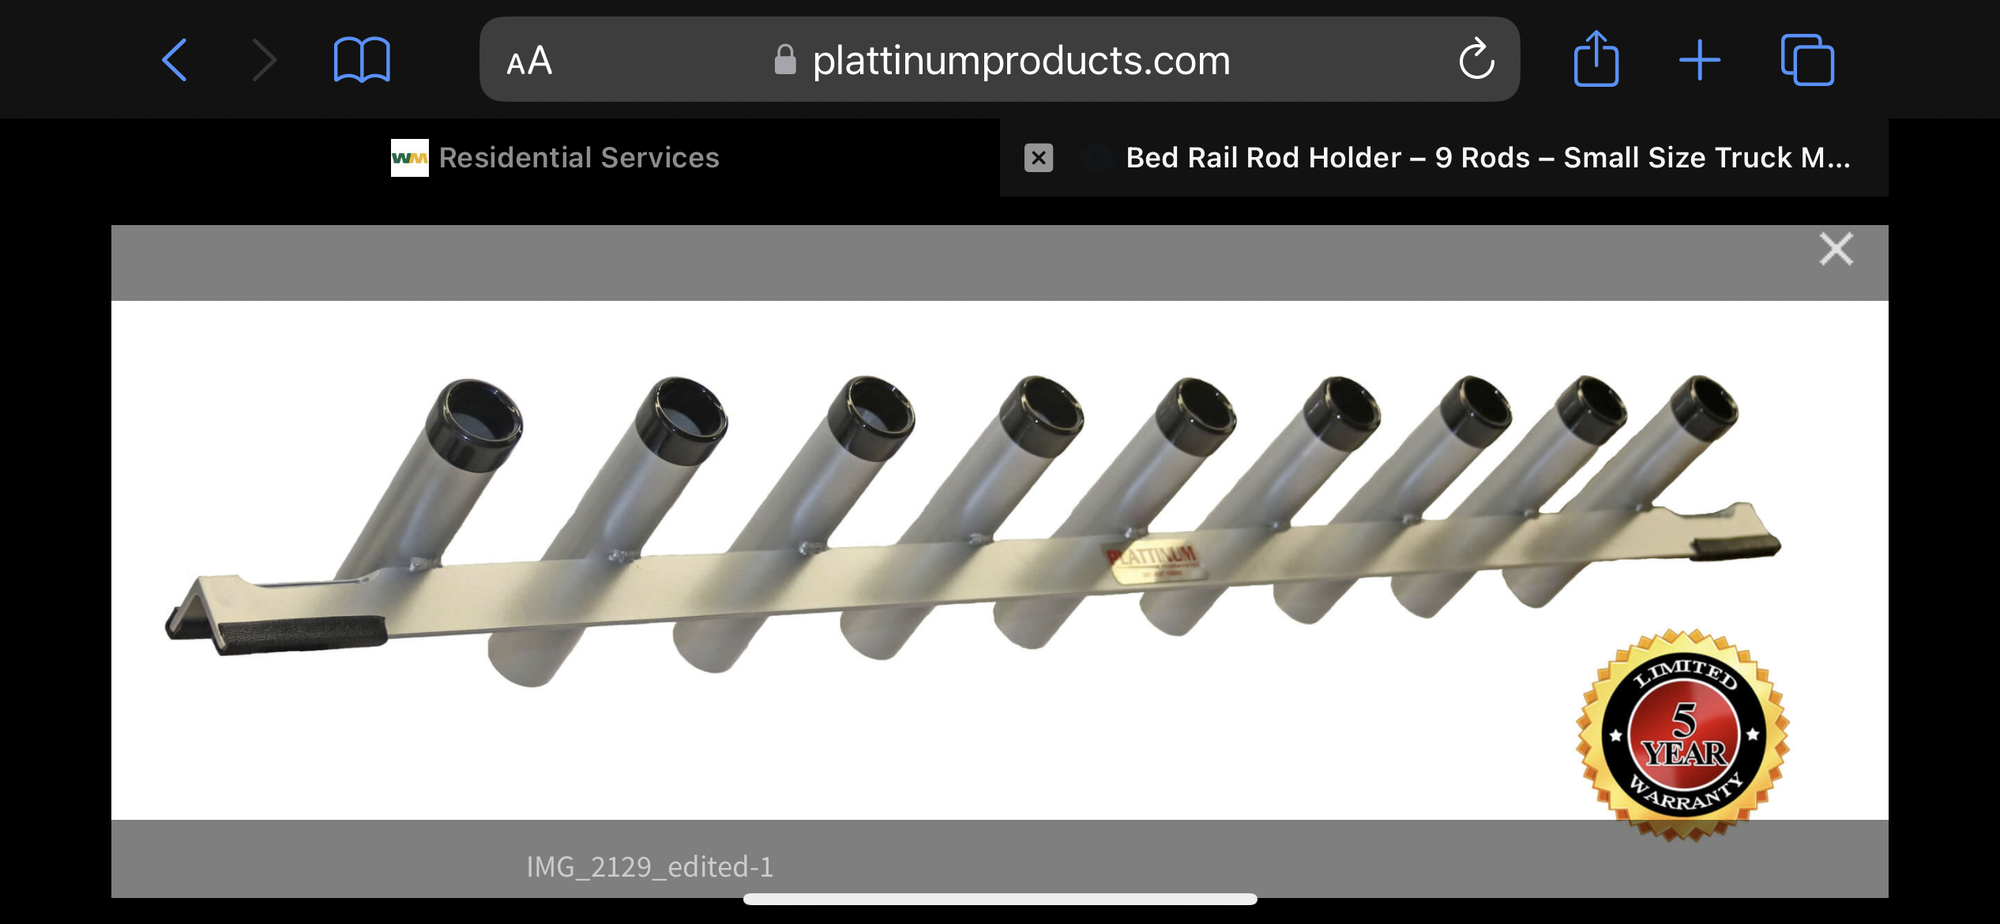 Platinum truck bed rod holder small truck - The Hull Truth - Boating and Fishing  Forum